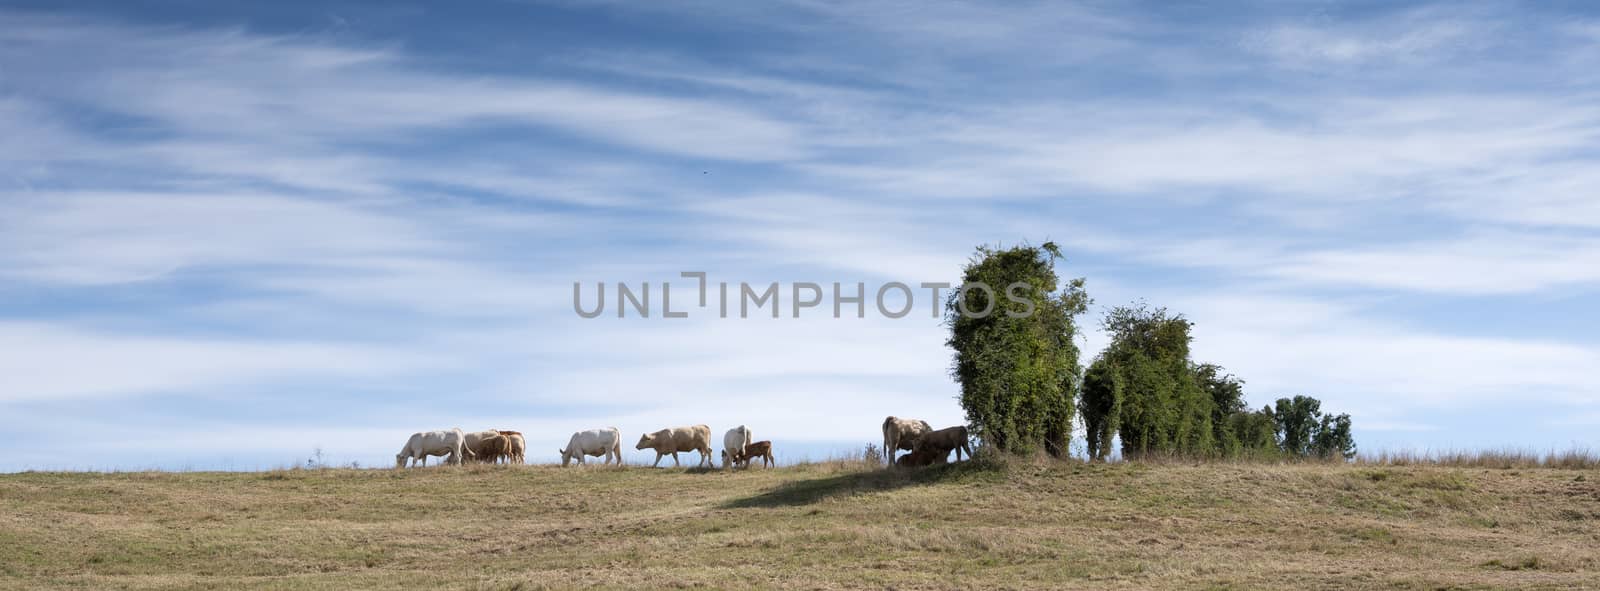 cows in rural landscape of nord pas de calais in france under blue sky in summer